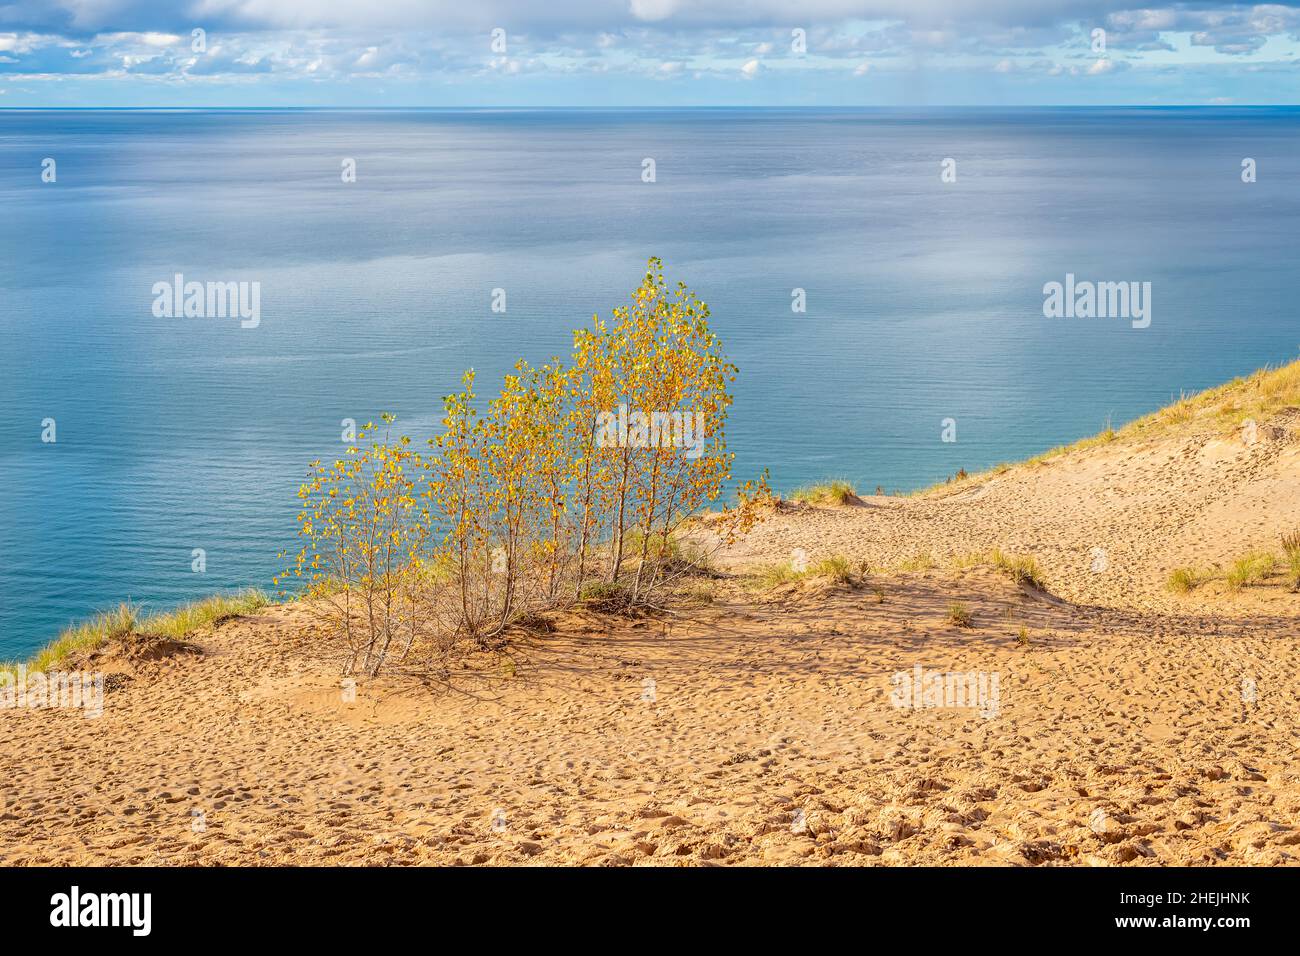 A stand of Yellow Quaking Aspen trees (Populus tremuloides) on a dune overlooking the Lake Michigan shoreline in the autumn the Sleeping Bear Dunes Na Stock Photo